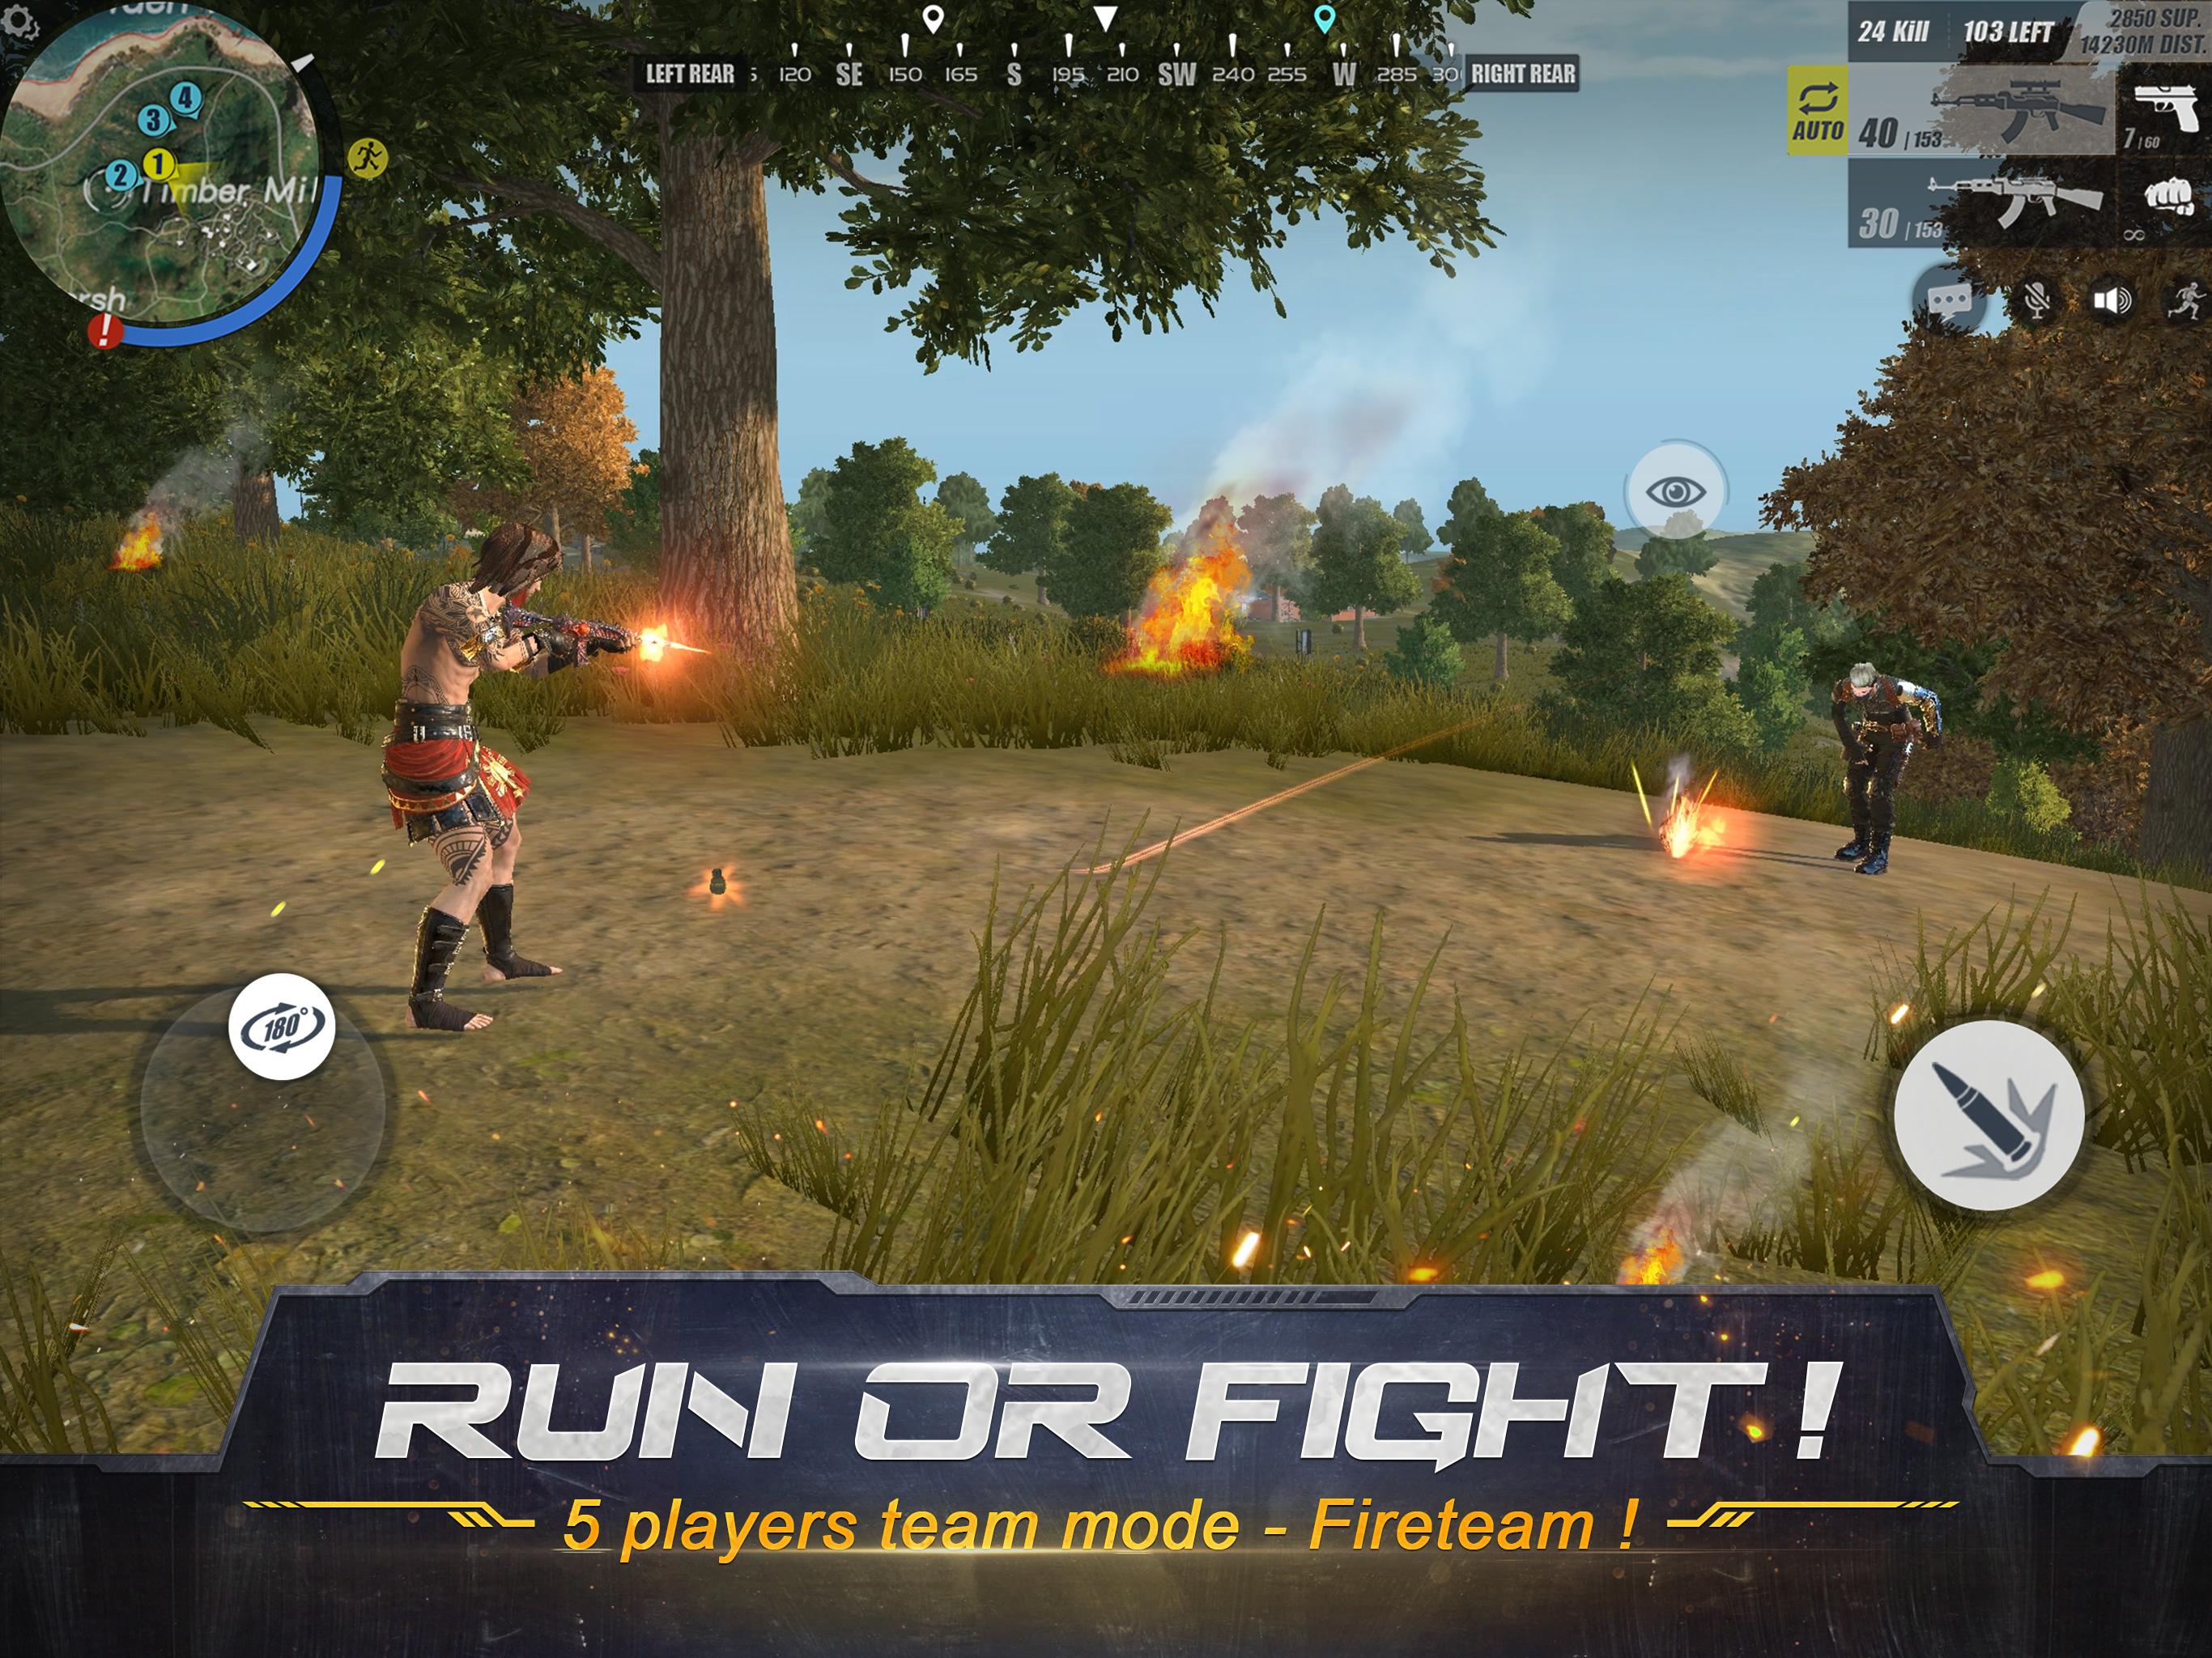 RULES OF SURVIVAL for Android - APK Download - 